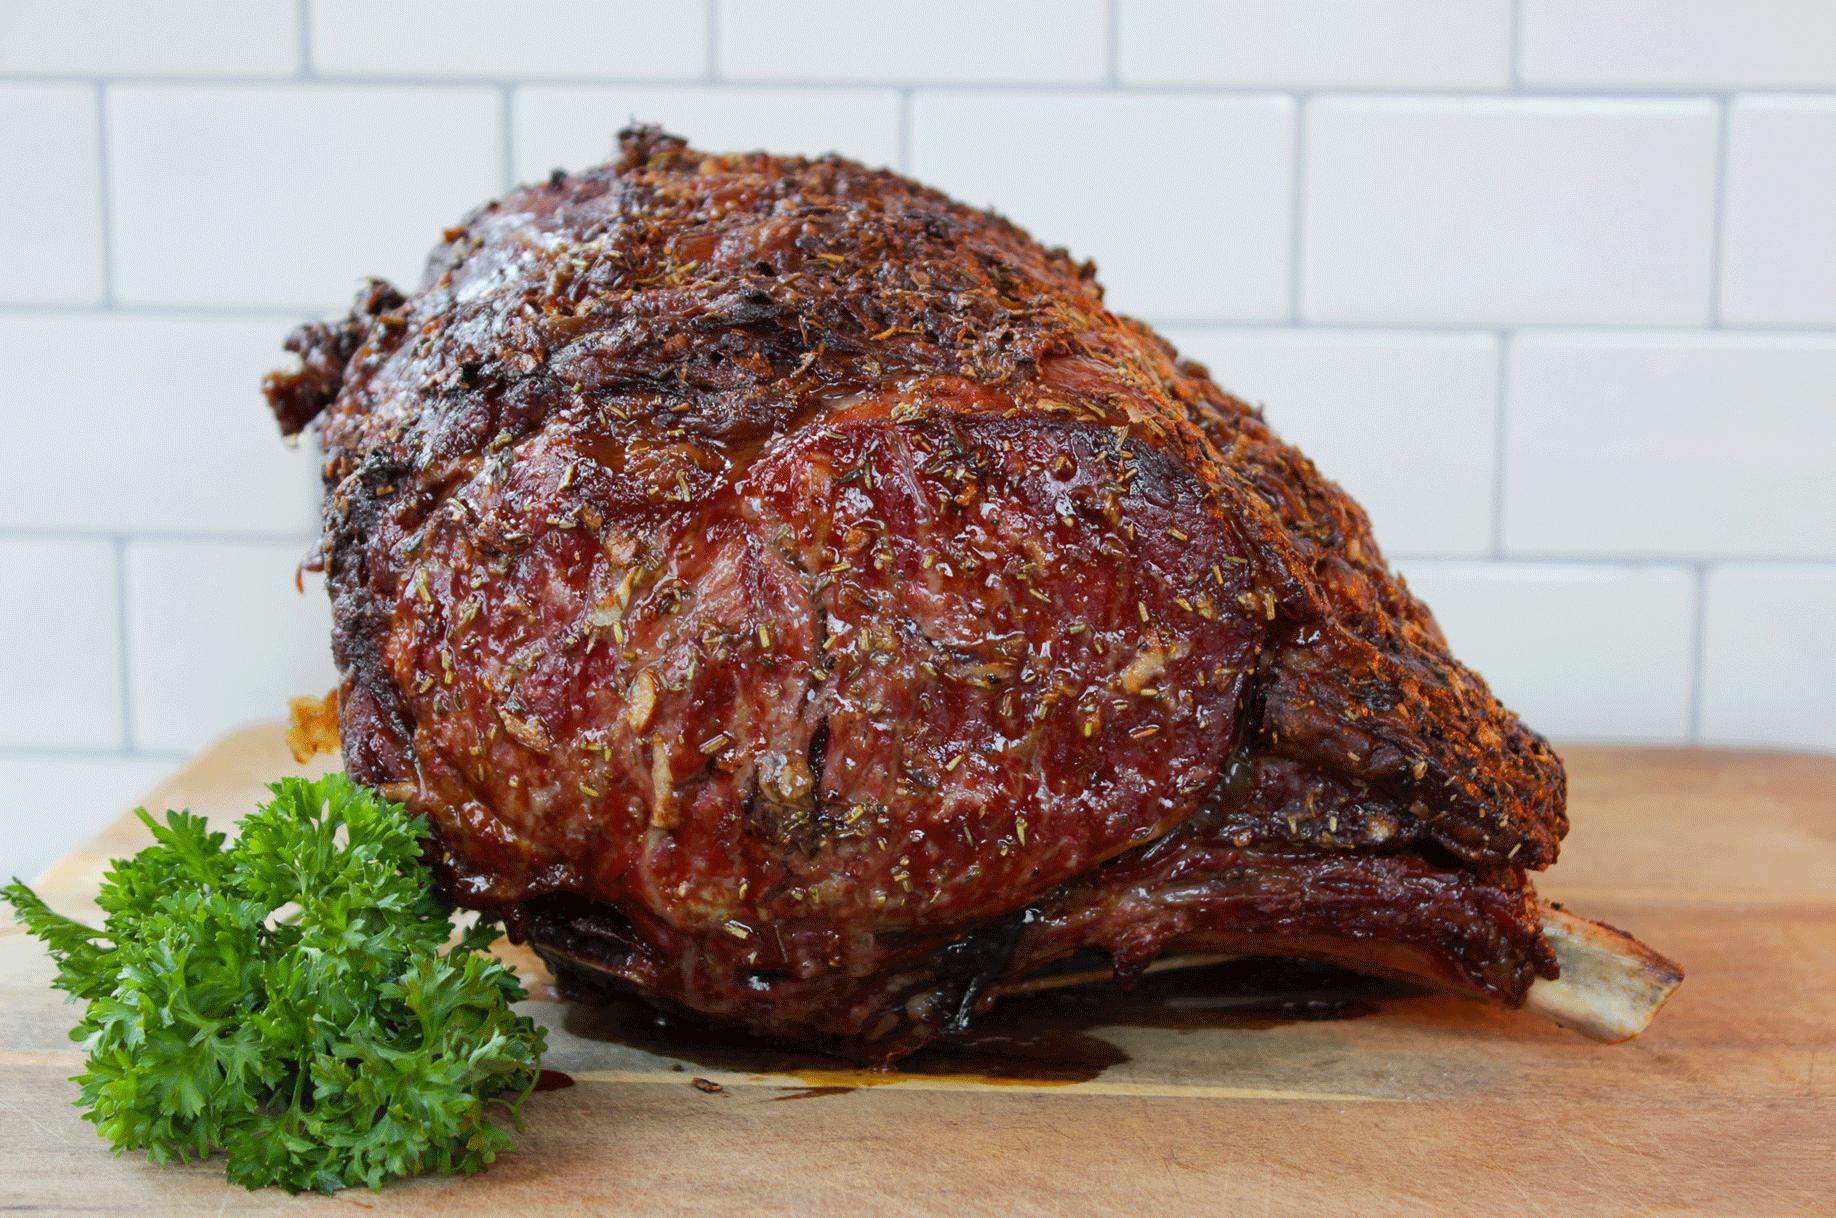  This mouthwatering Prime Rib is sure to be the star of the show on any dinner table